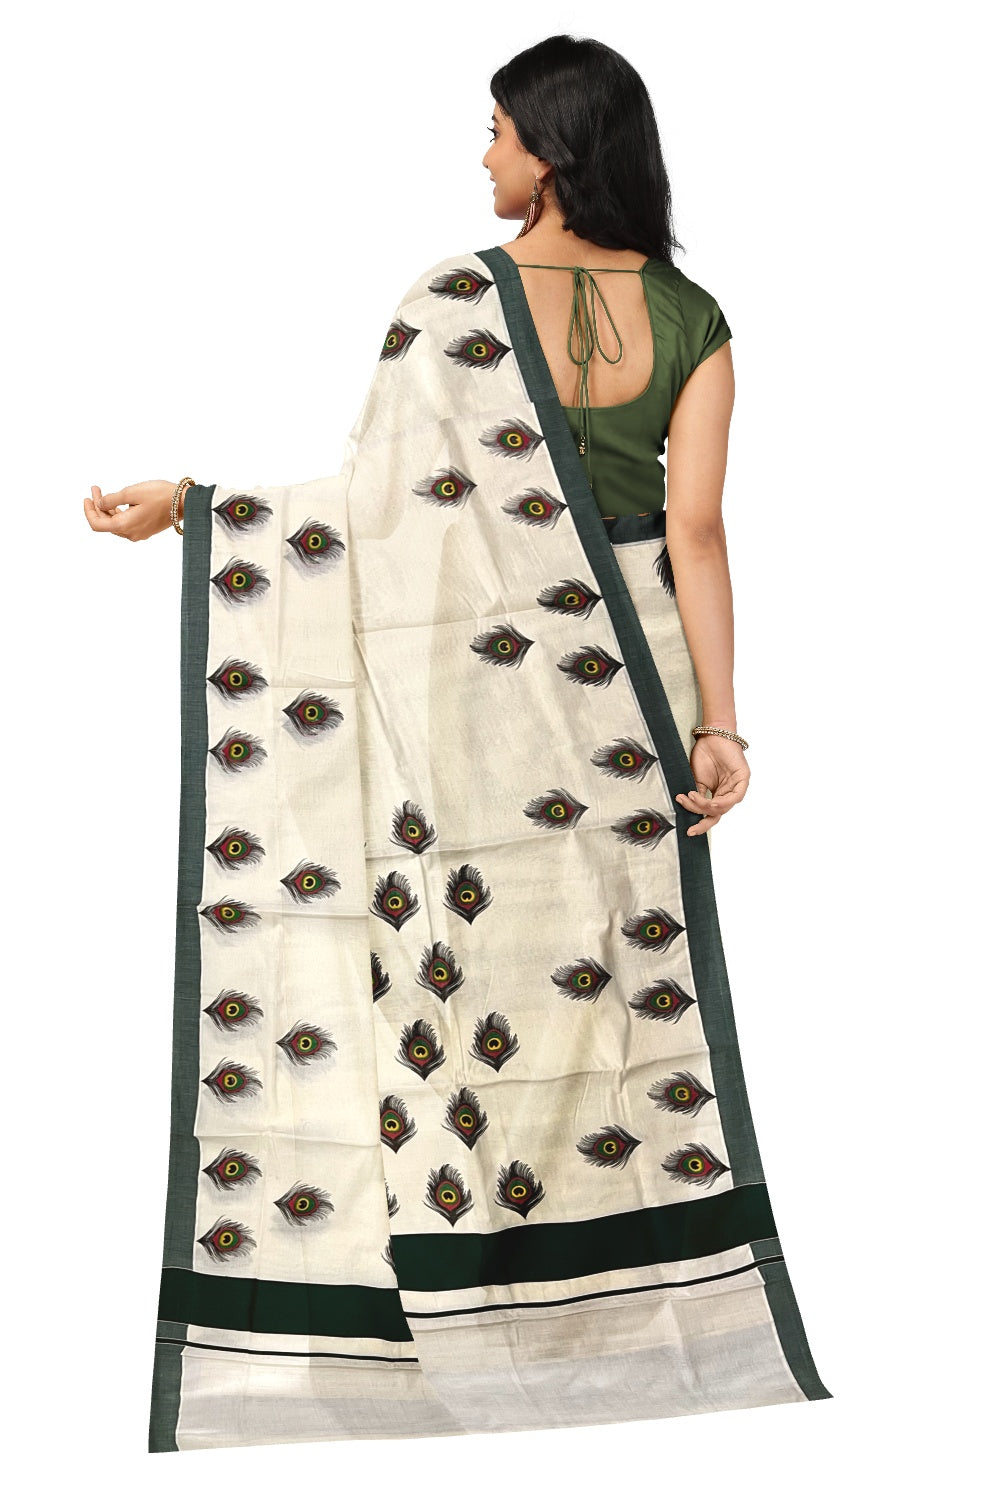 Kerala Pure Cotton Saree with Mural Printed Feather Design and Dark Green Border